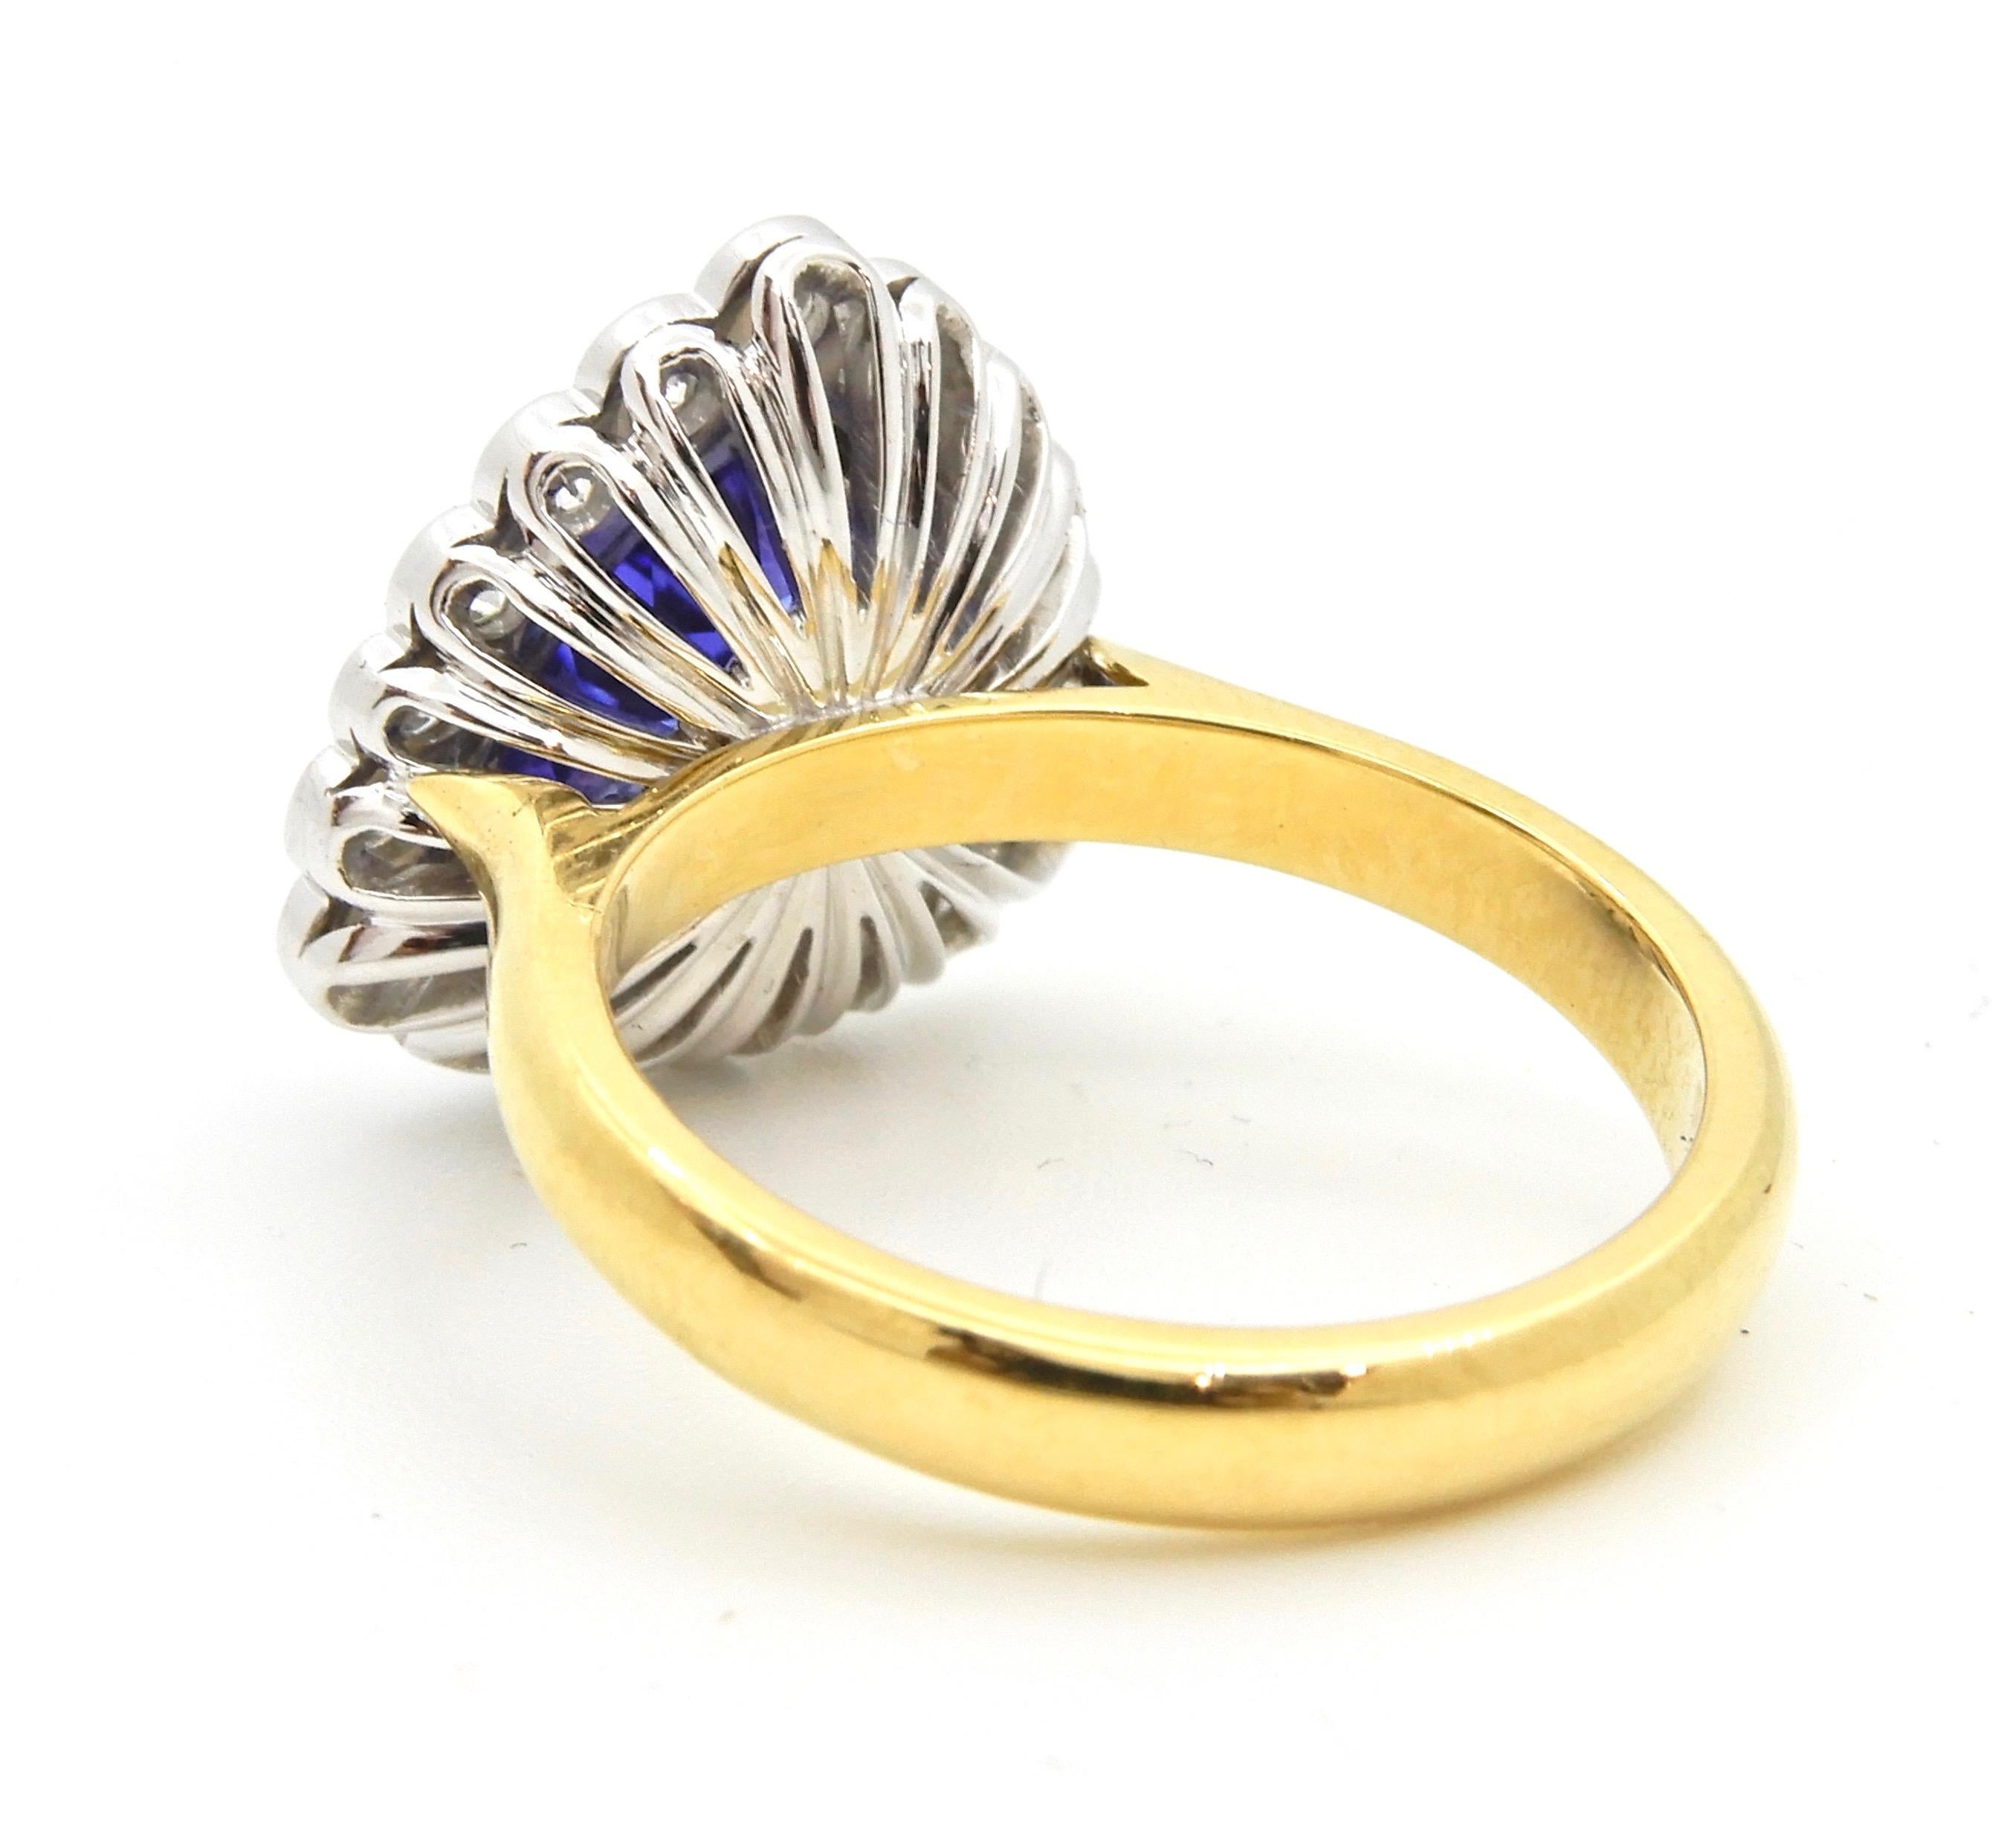 This 2.06 carat trilliant cut Tanzanite and Diamond ring is set in 18 carat gold. The slightly rounded, flat edge, yellow gold band rises to a white gold triangular cluster of one bezel set trilliant cut Tanzanite surrounded by a scalloped boarder